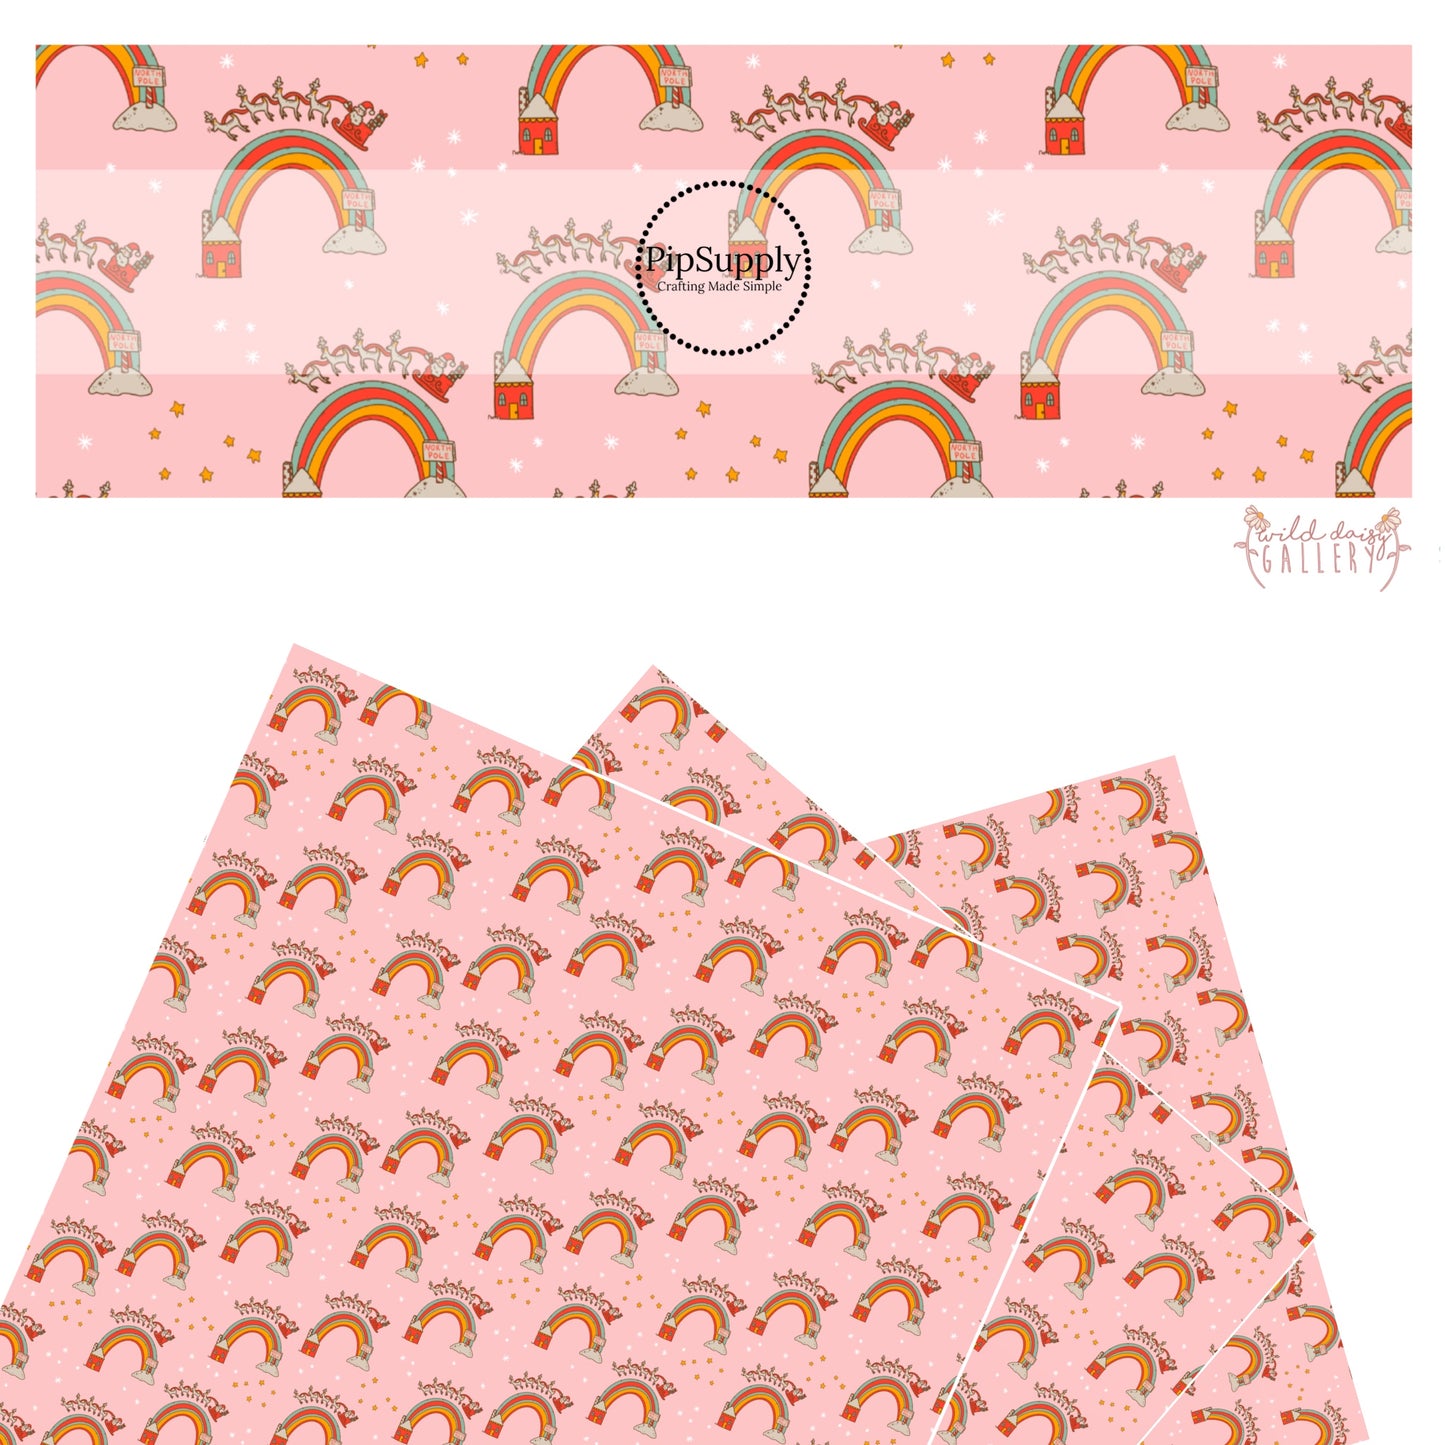 Rainbows, santa, reindeer, and stars on pink faux leather sheets